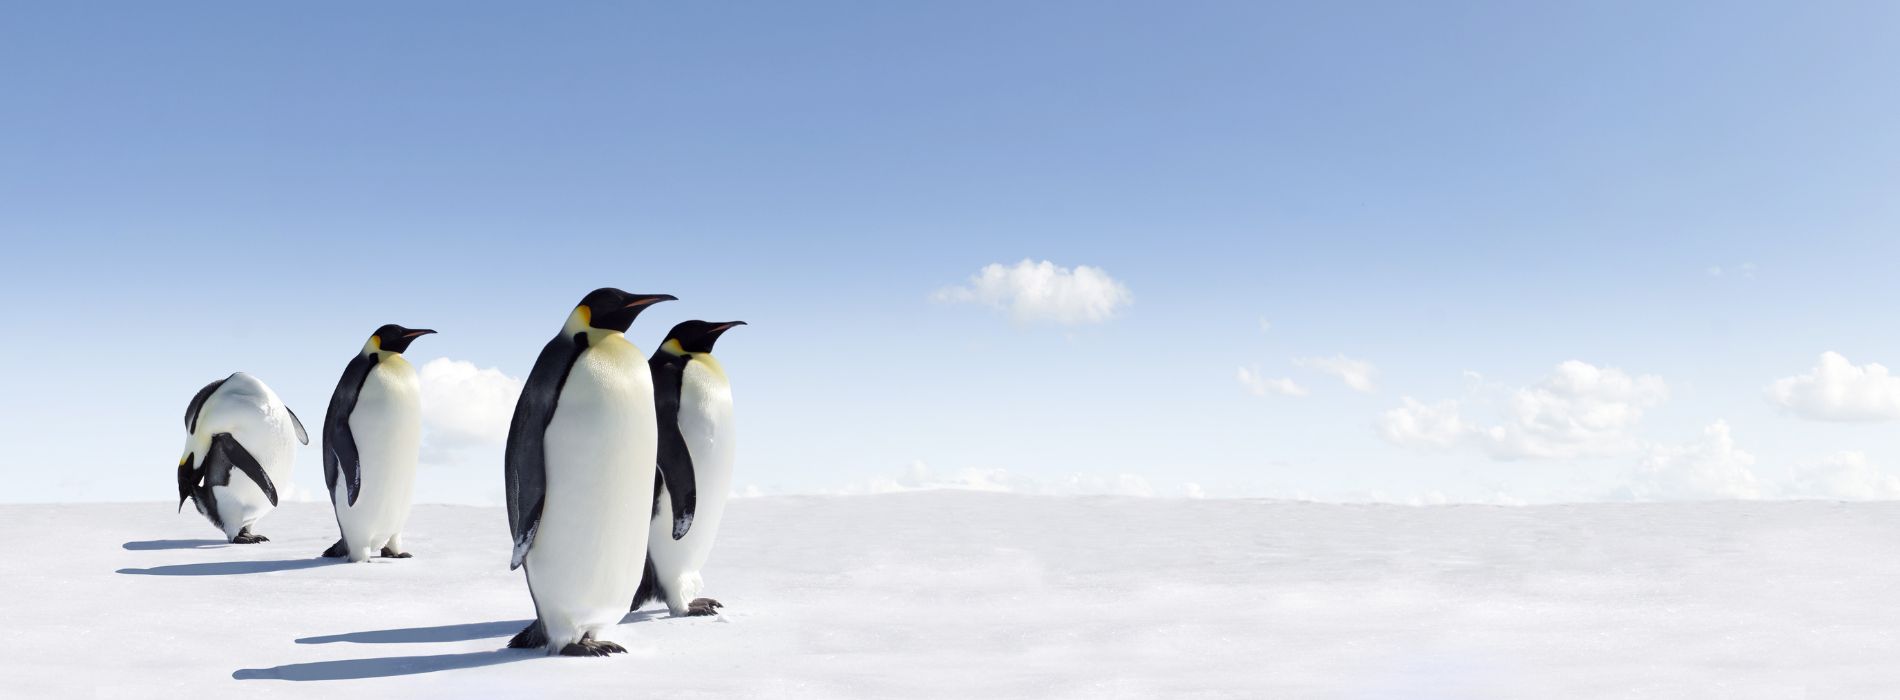 Can penguins survive being frozen?